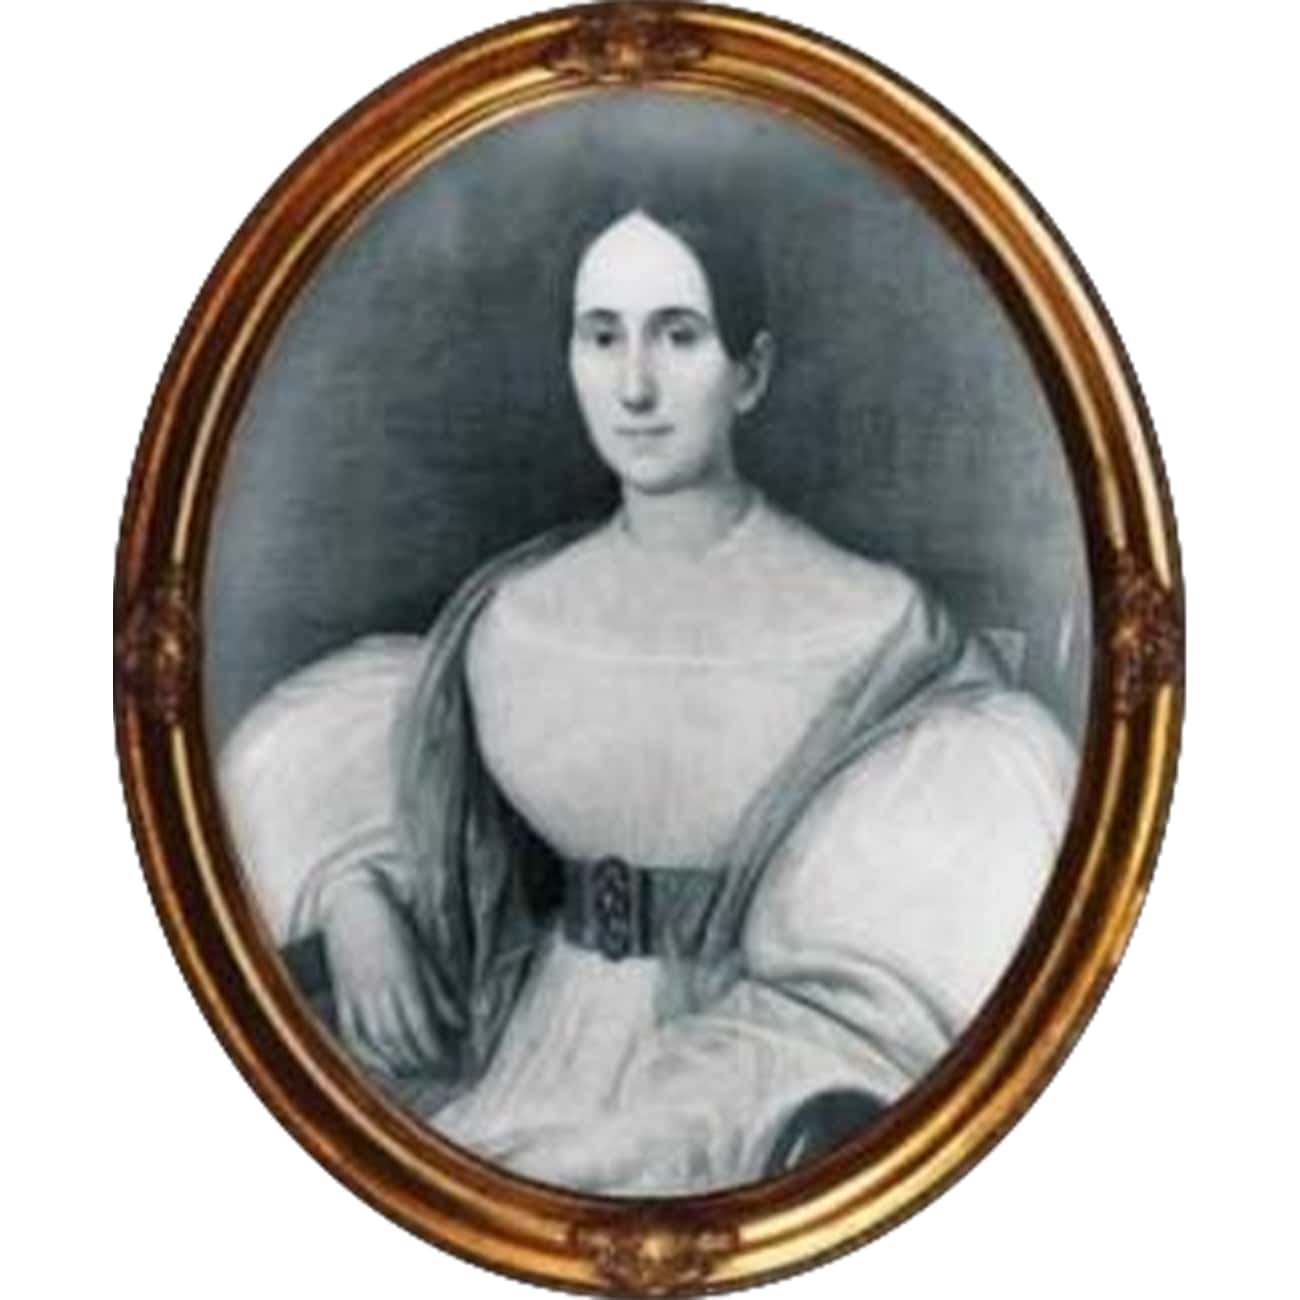 Delphine LaLaurie Committed Unspeakable Acts Of Torture In Her Home